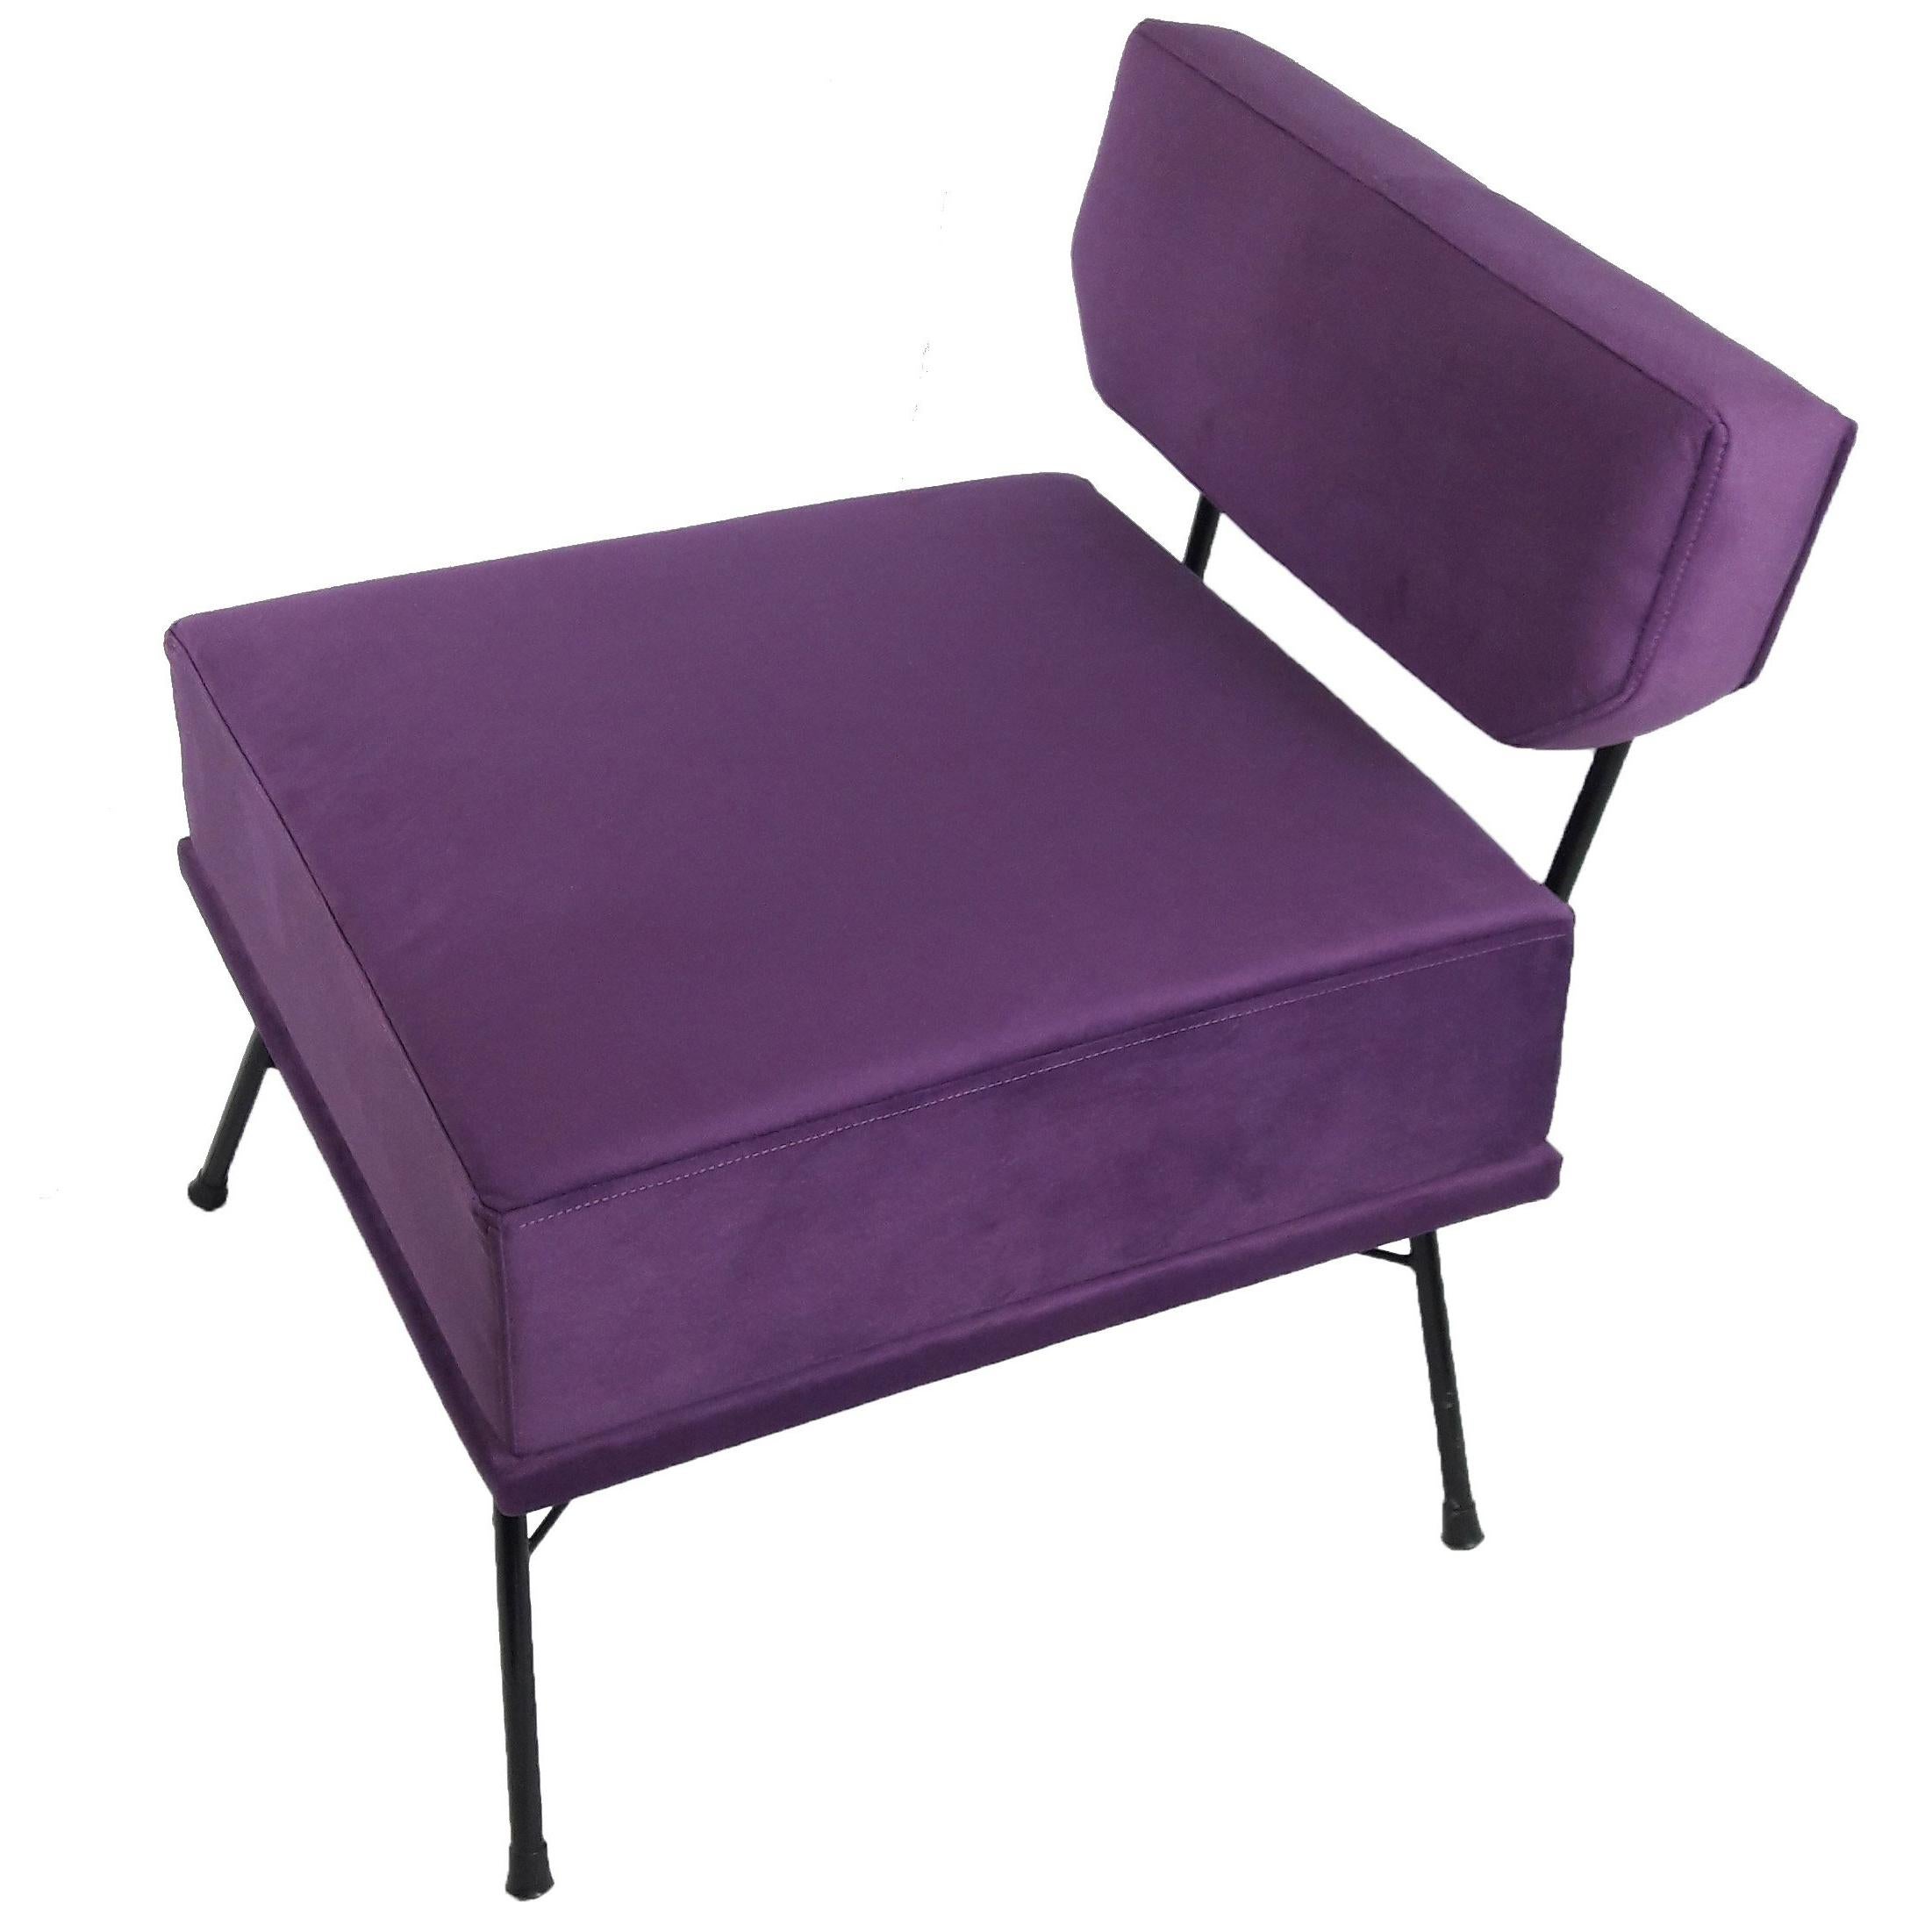 Midcentury Elettra's Style Italian Violet Armchair, 1950s For Sale